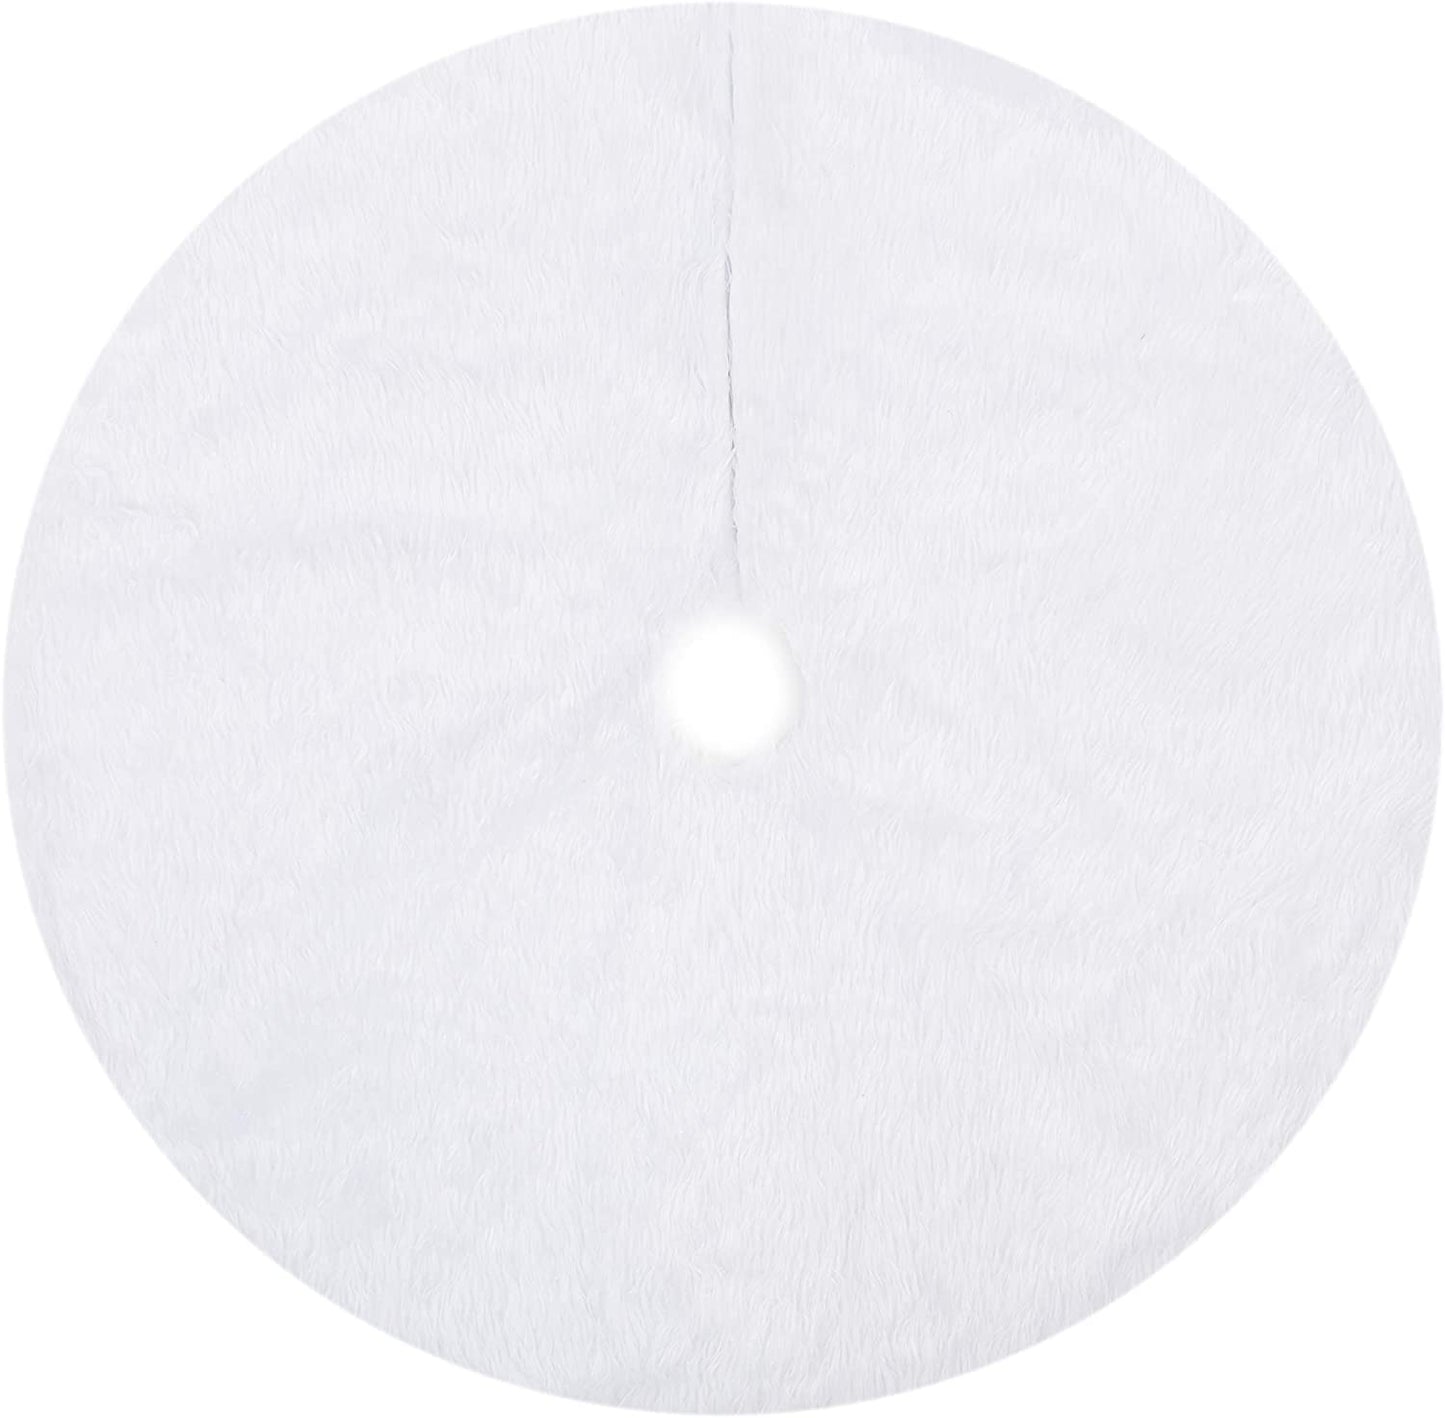 36in Faux Fur Christmas Tree Skirt, Snowy White